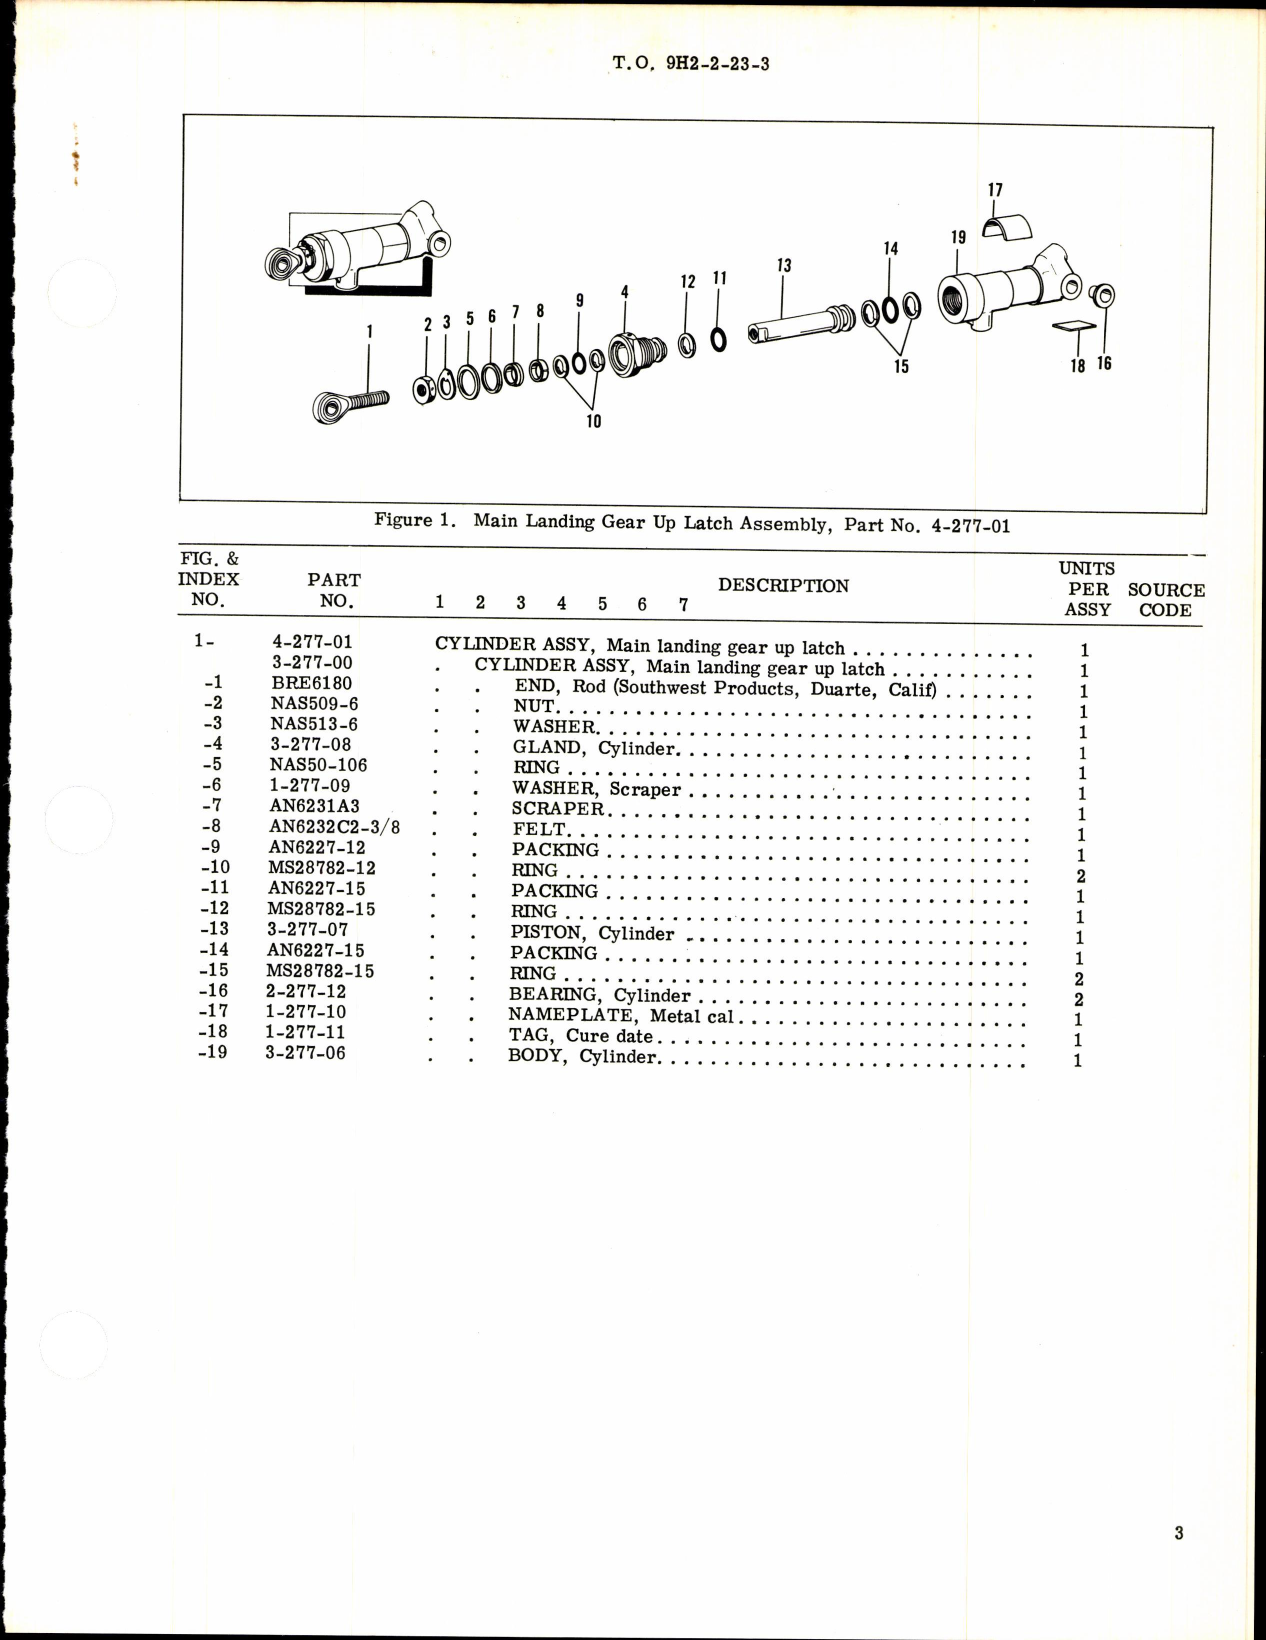 Sample page 3 from AirCorps Library document: Main Landing Gear Up Latch Cylinder Part No 4-277-01